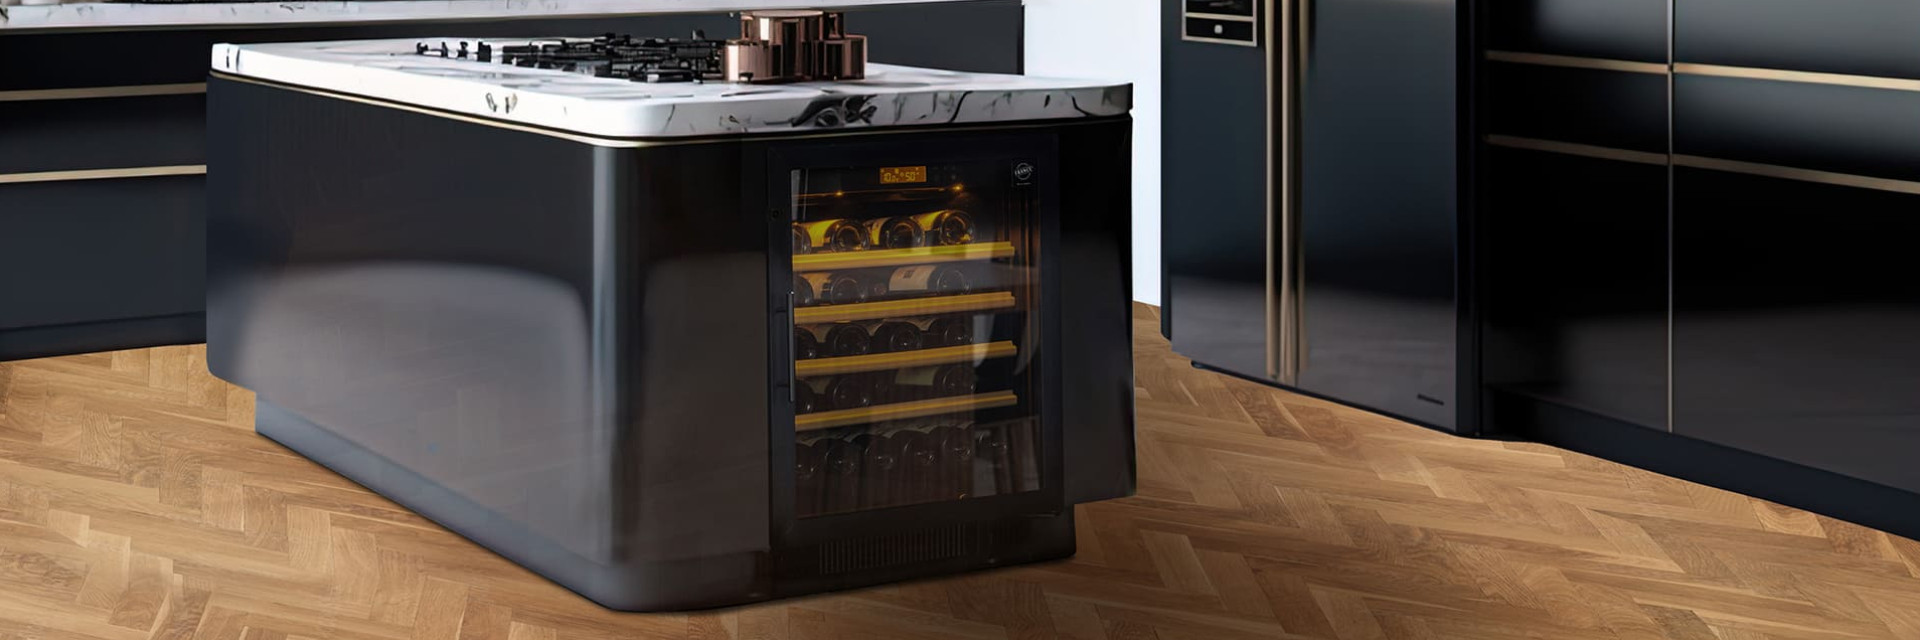 A built-in wine cooler under the worktop of a contemporary black kitchen in an apartment like a mini fridge. Compact EuroCave